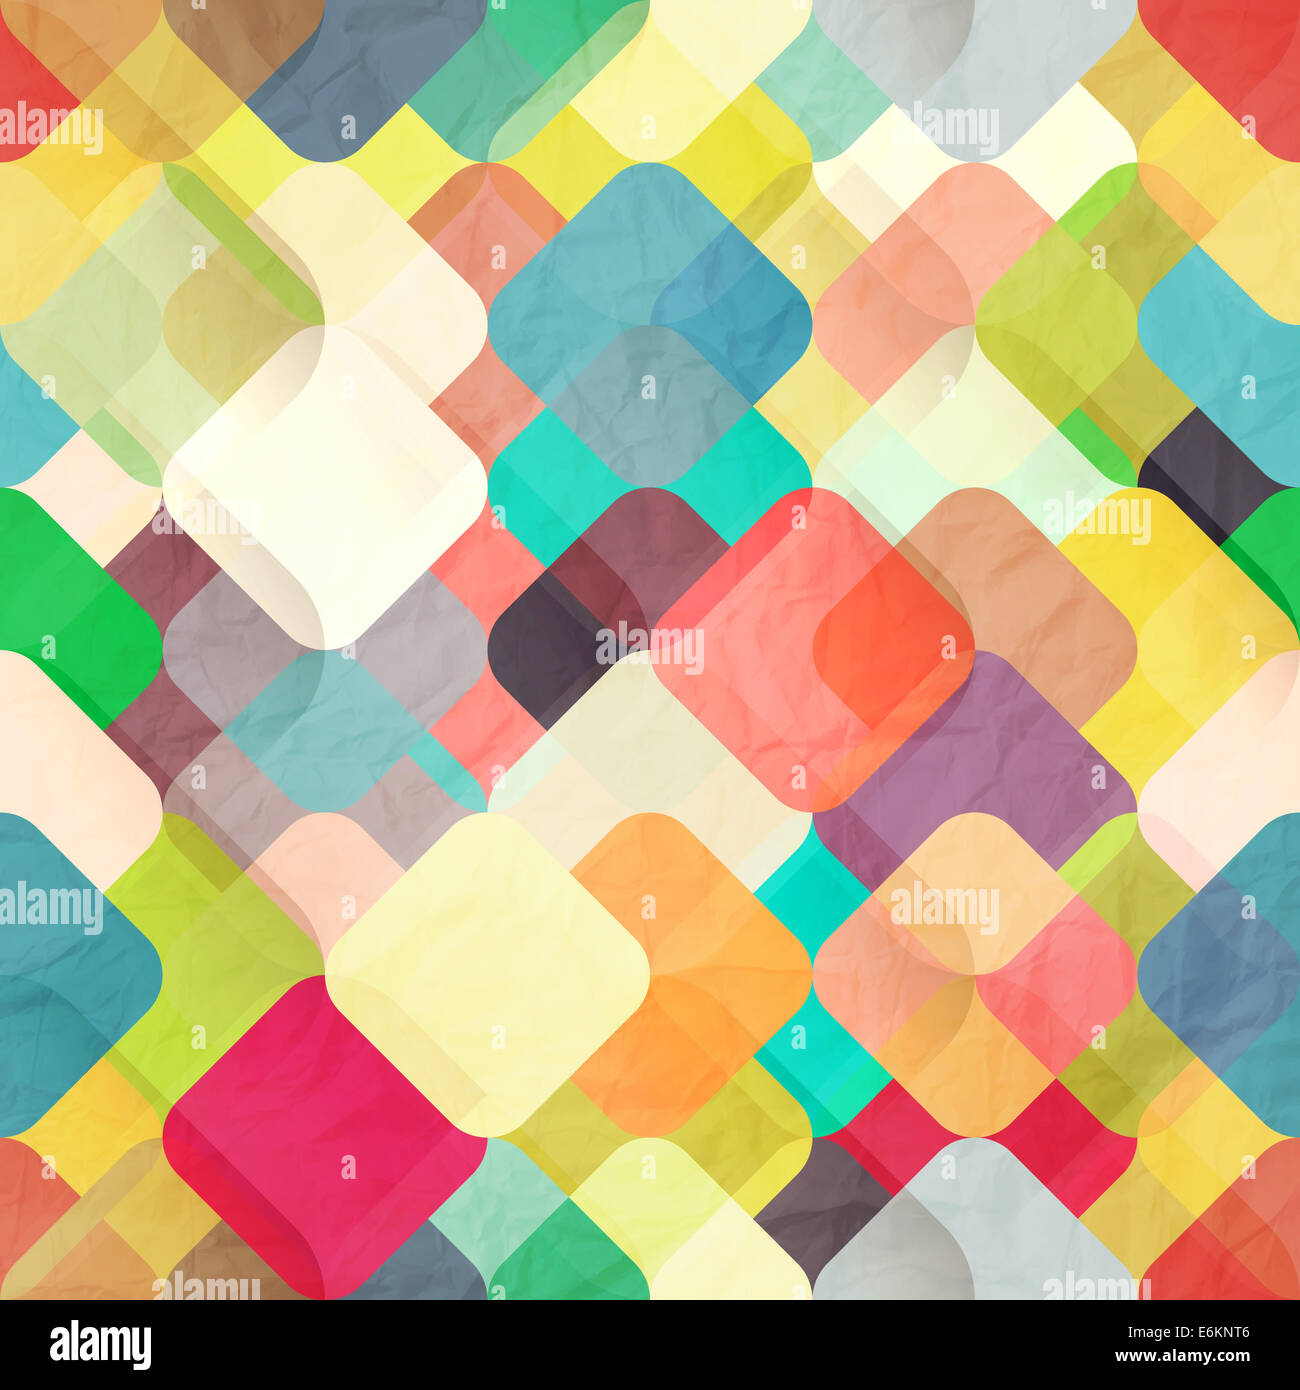 abstract fashion wallpaper with colorful geometric ornament Stock Photo